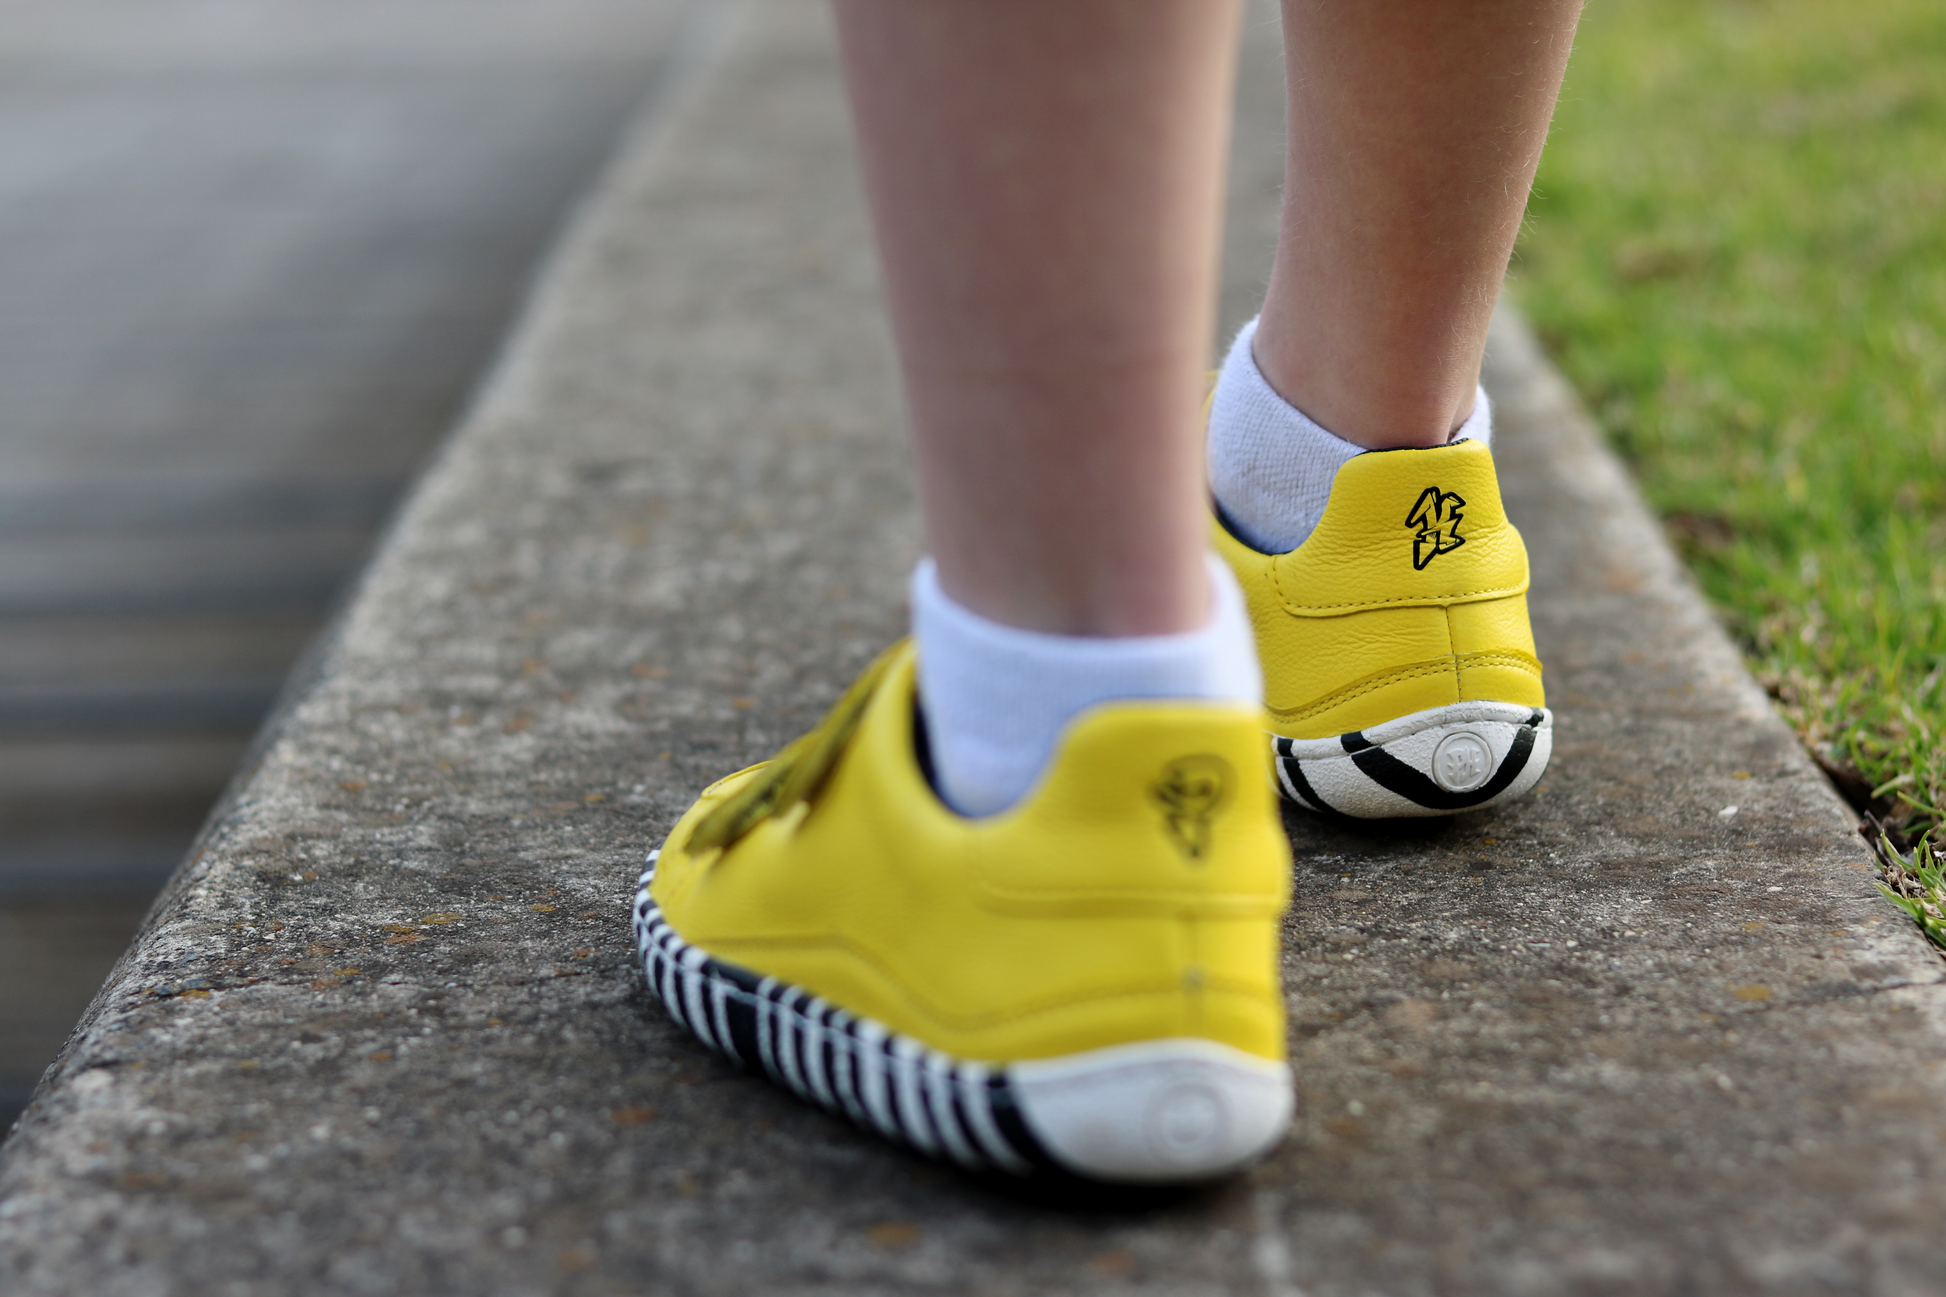 Sunray shoes on a child